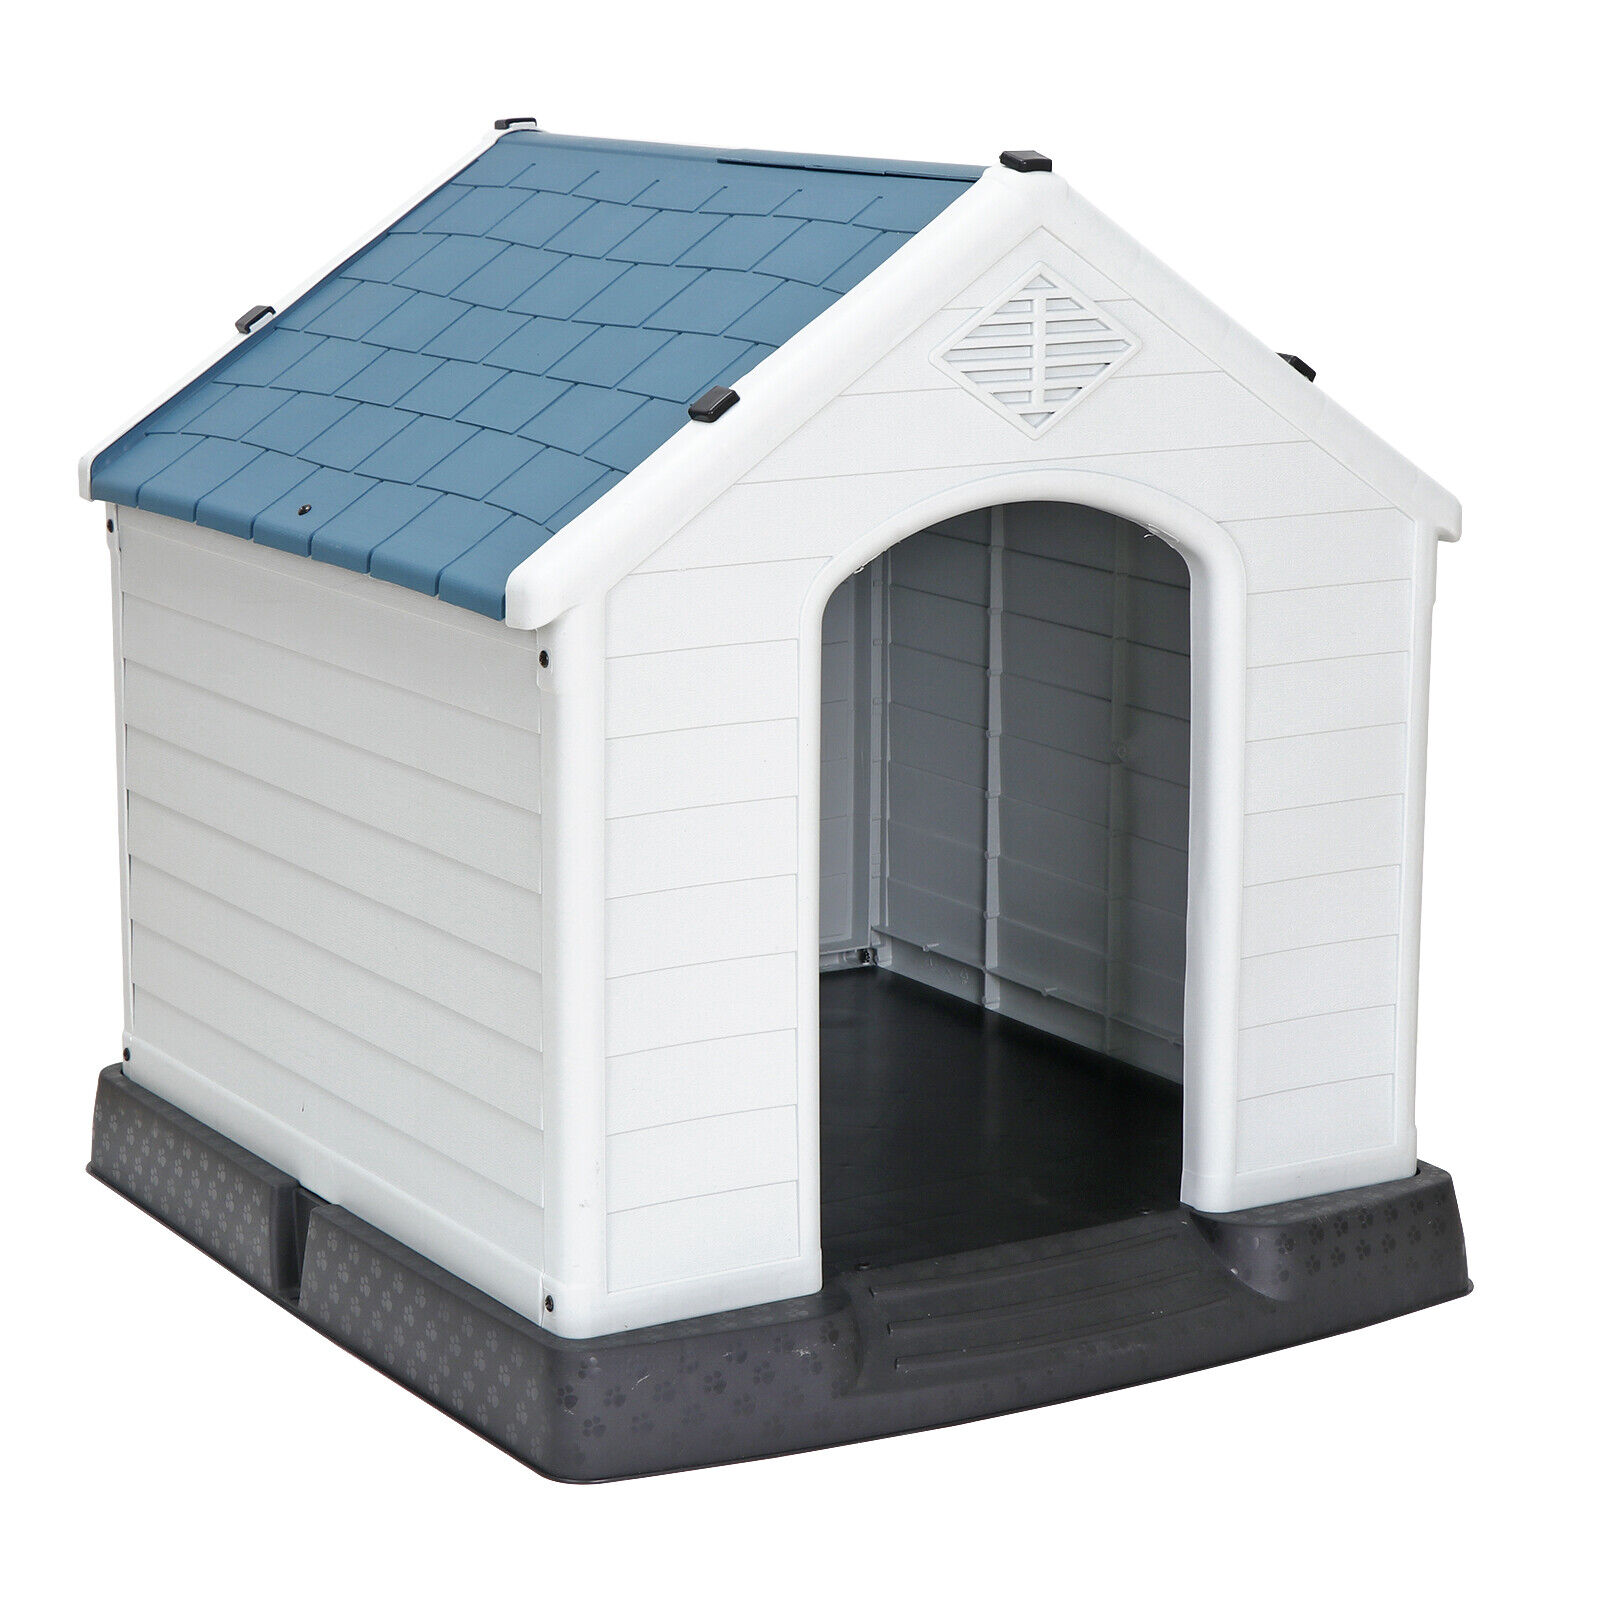 Great Choice Products Large Dog House Durable Plastic Et Kennel Crate With Air Vents Elevated Floor